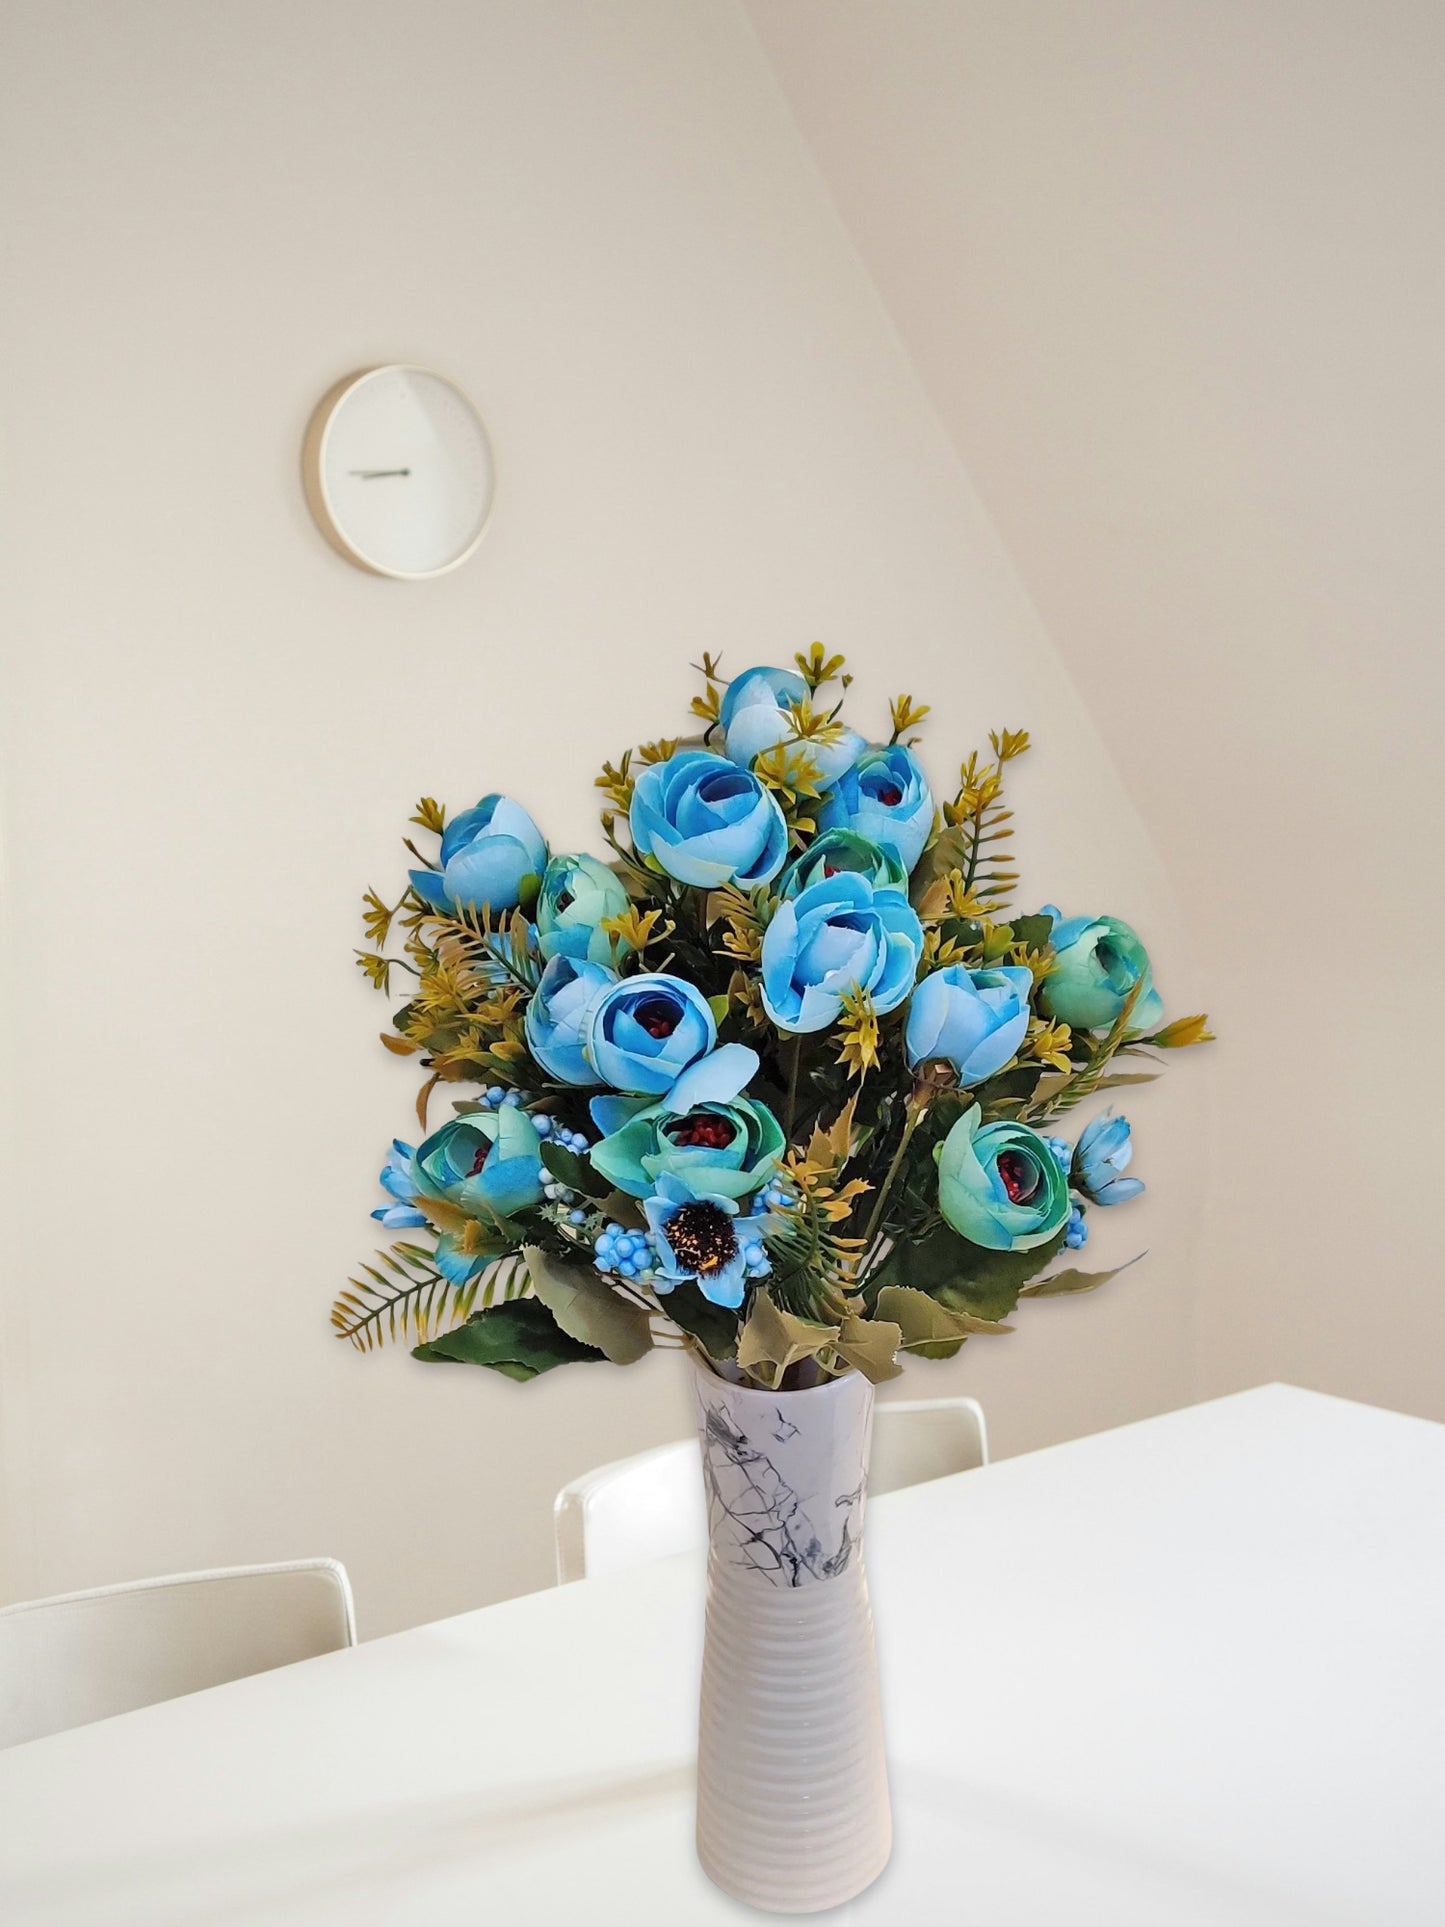 ARTSY® Artificial Flowers for home decoration dry peony Flower bunch For room decor, Office, for vase, pot filler, gifting, Craft, Without Vase, combo, Pack of 2 piece, 6 branches each, blue